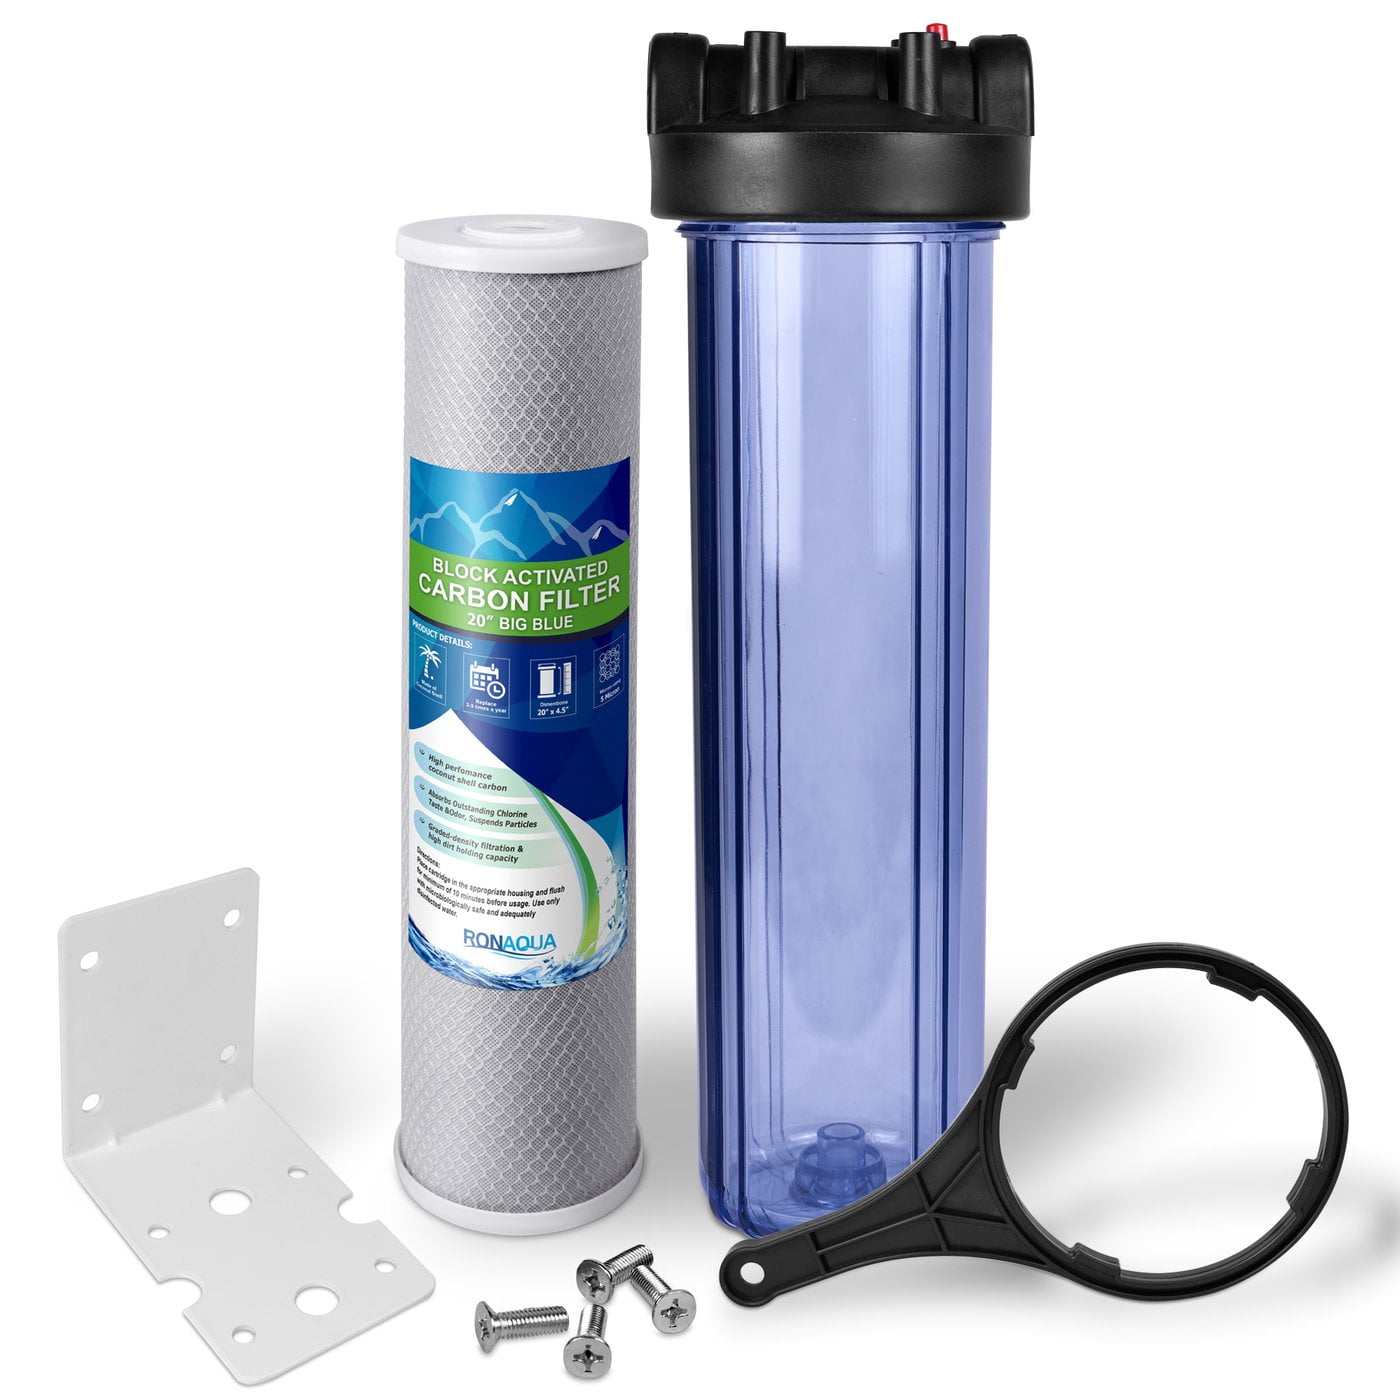 20 inch Big Blue Whole House Water Filter Purifier w/ CTO Carbon Block Cartridge